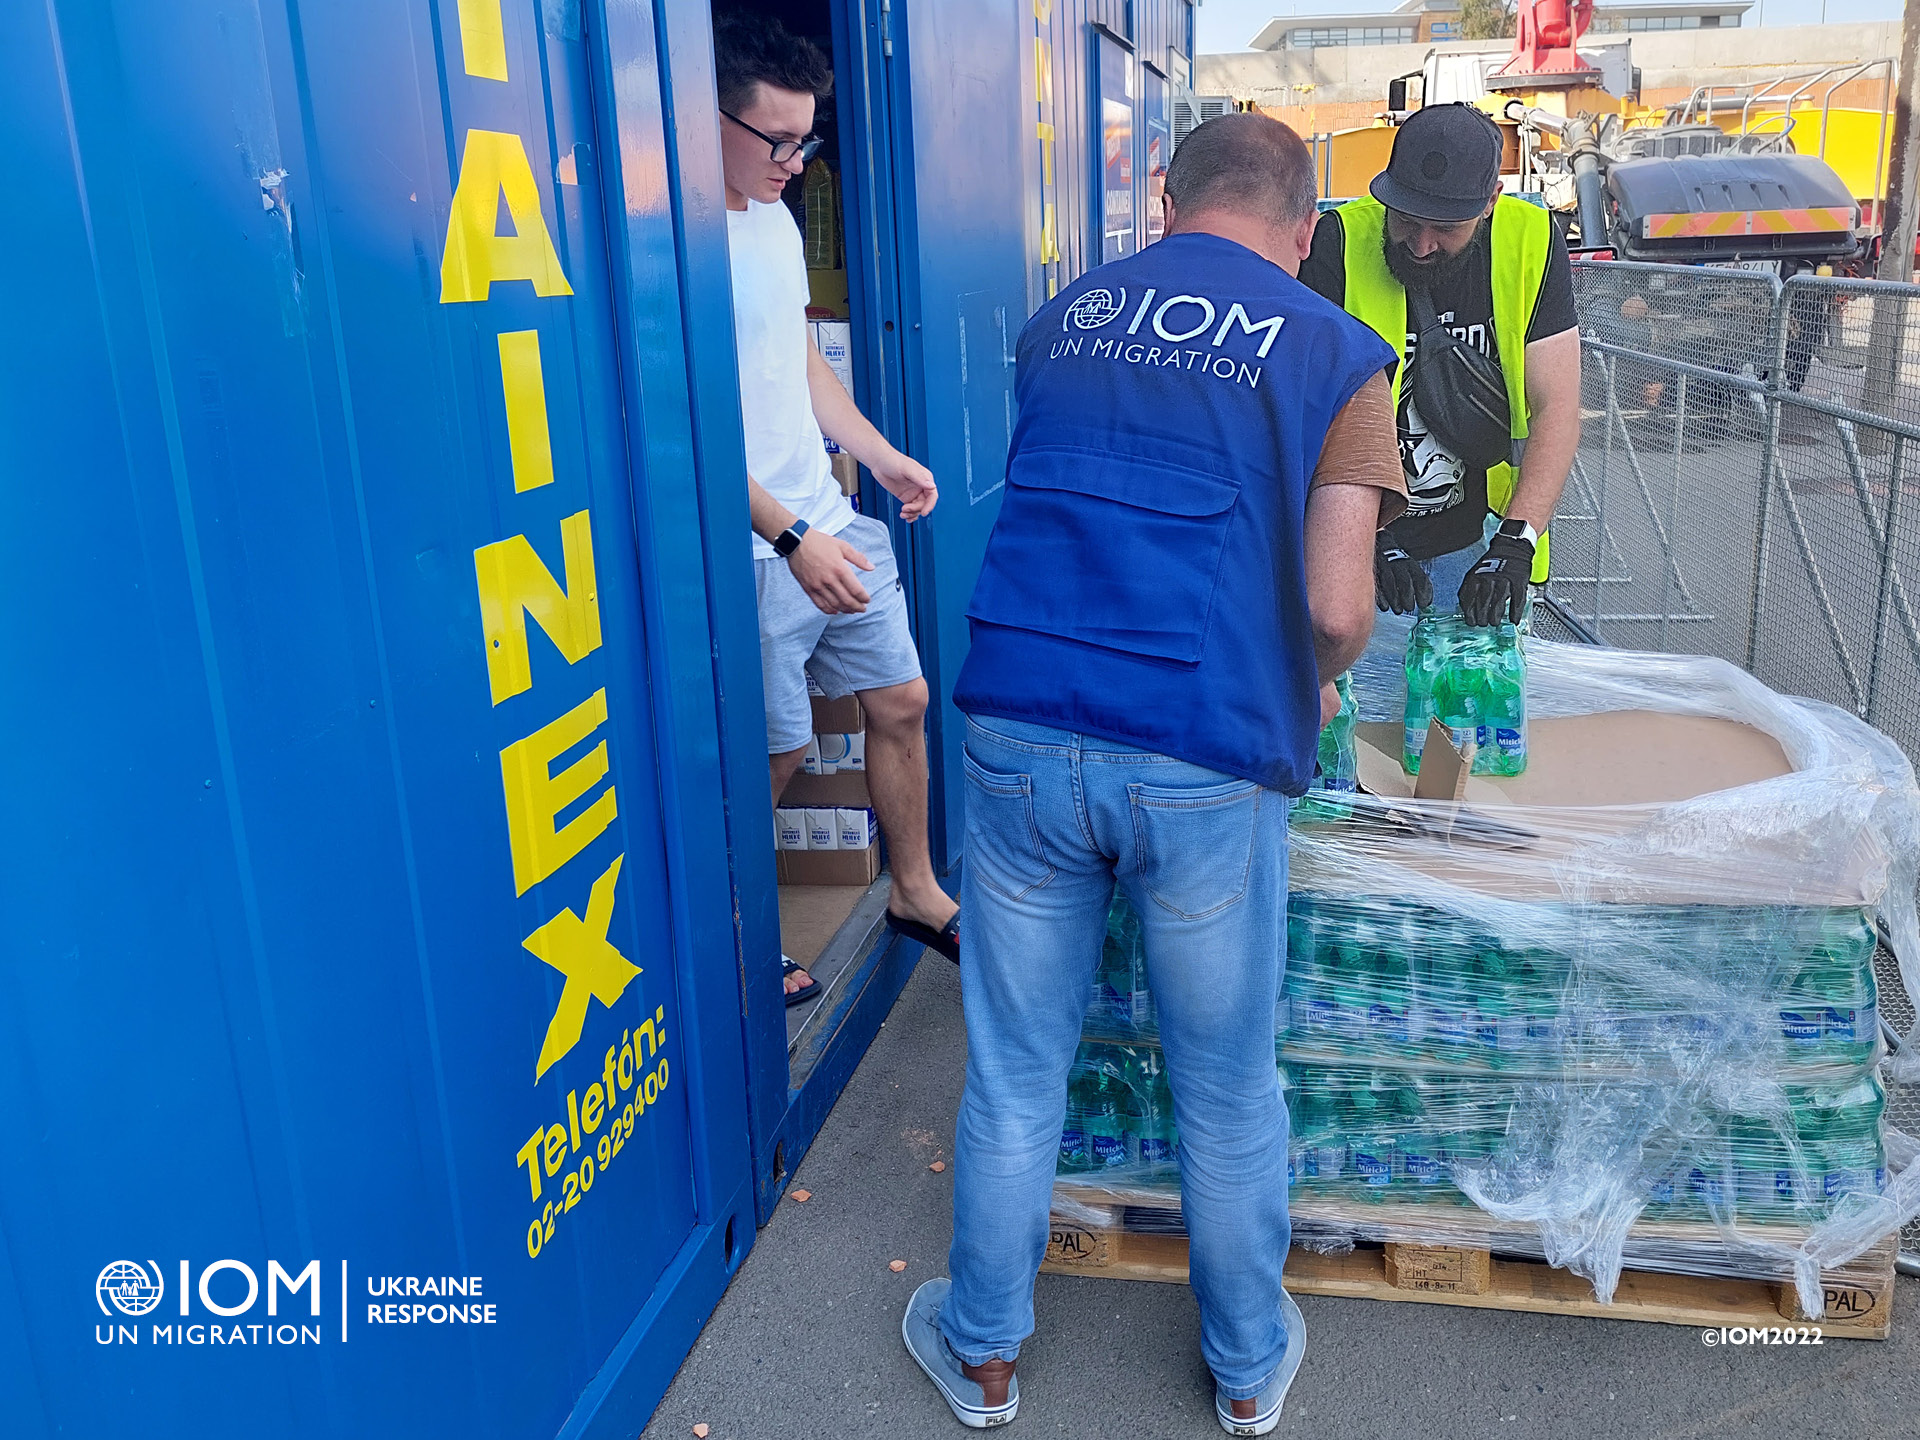 Delivery of first paletts of food humanitarian assistance to the Kosice hotspot in July 2022. Photo © International Organization for Migration (IOM) 2022.